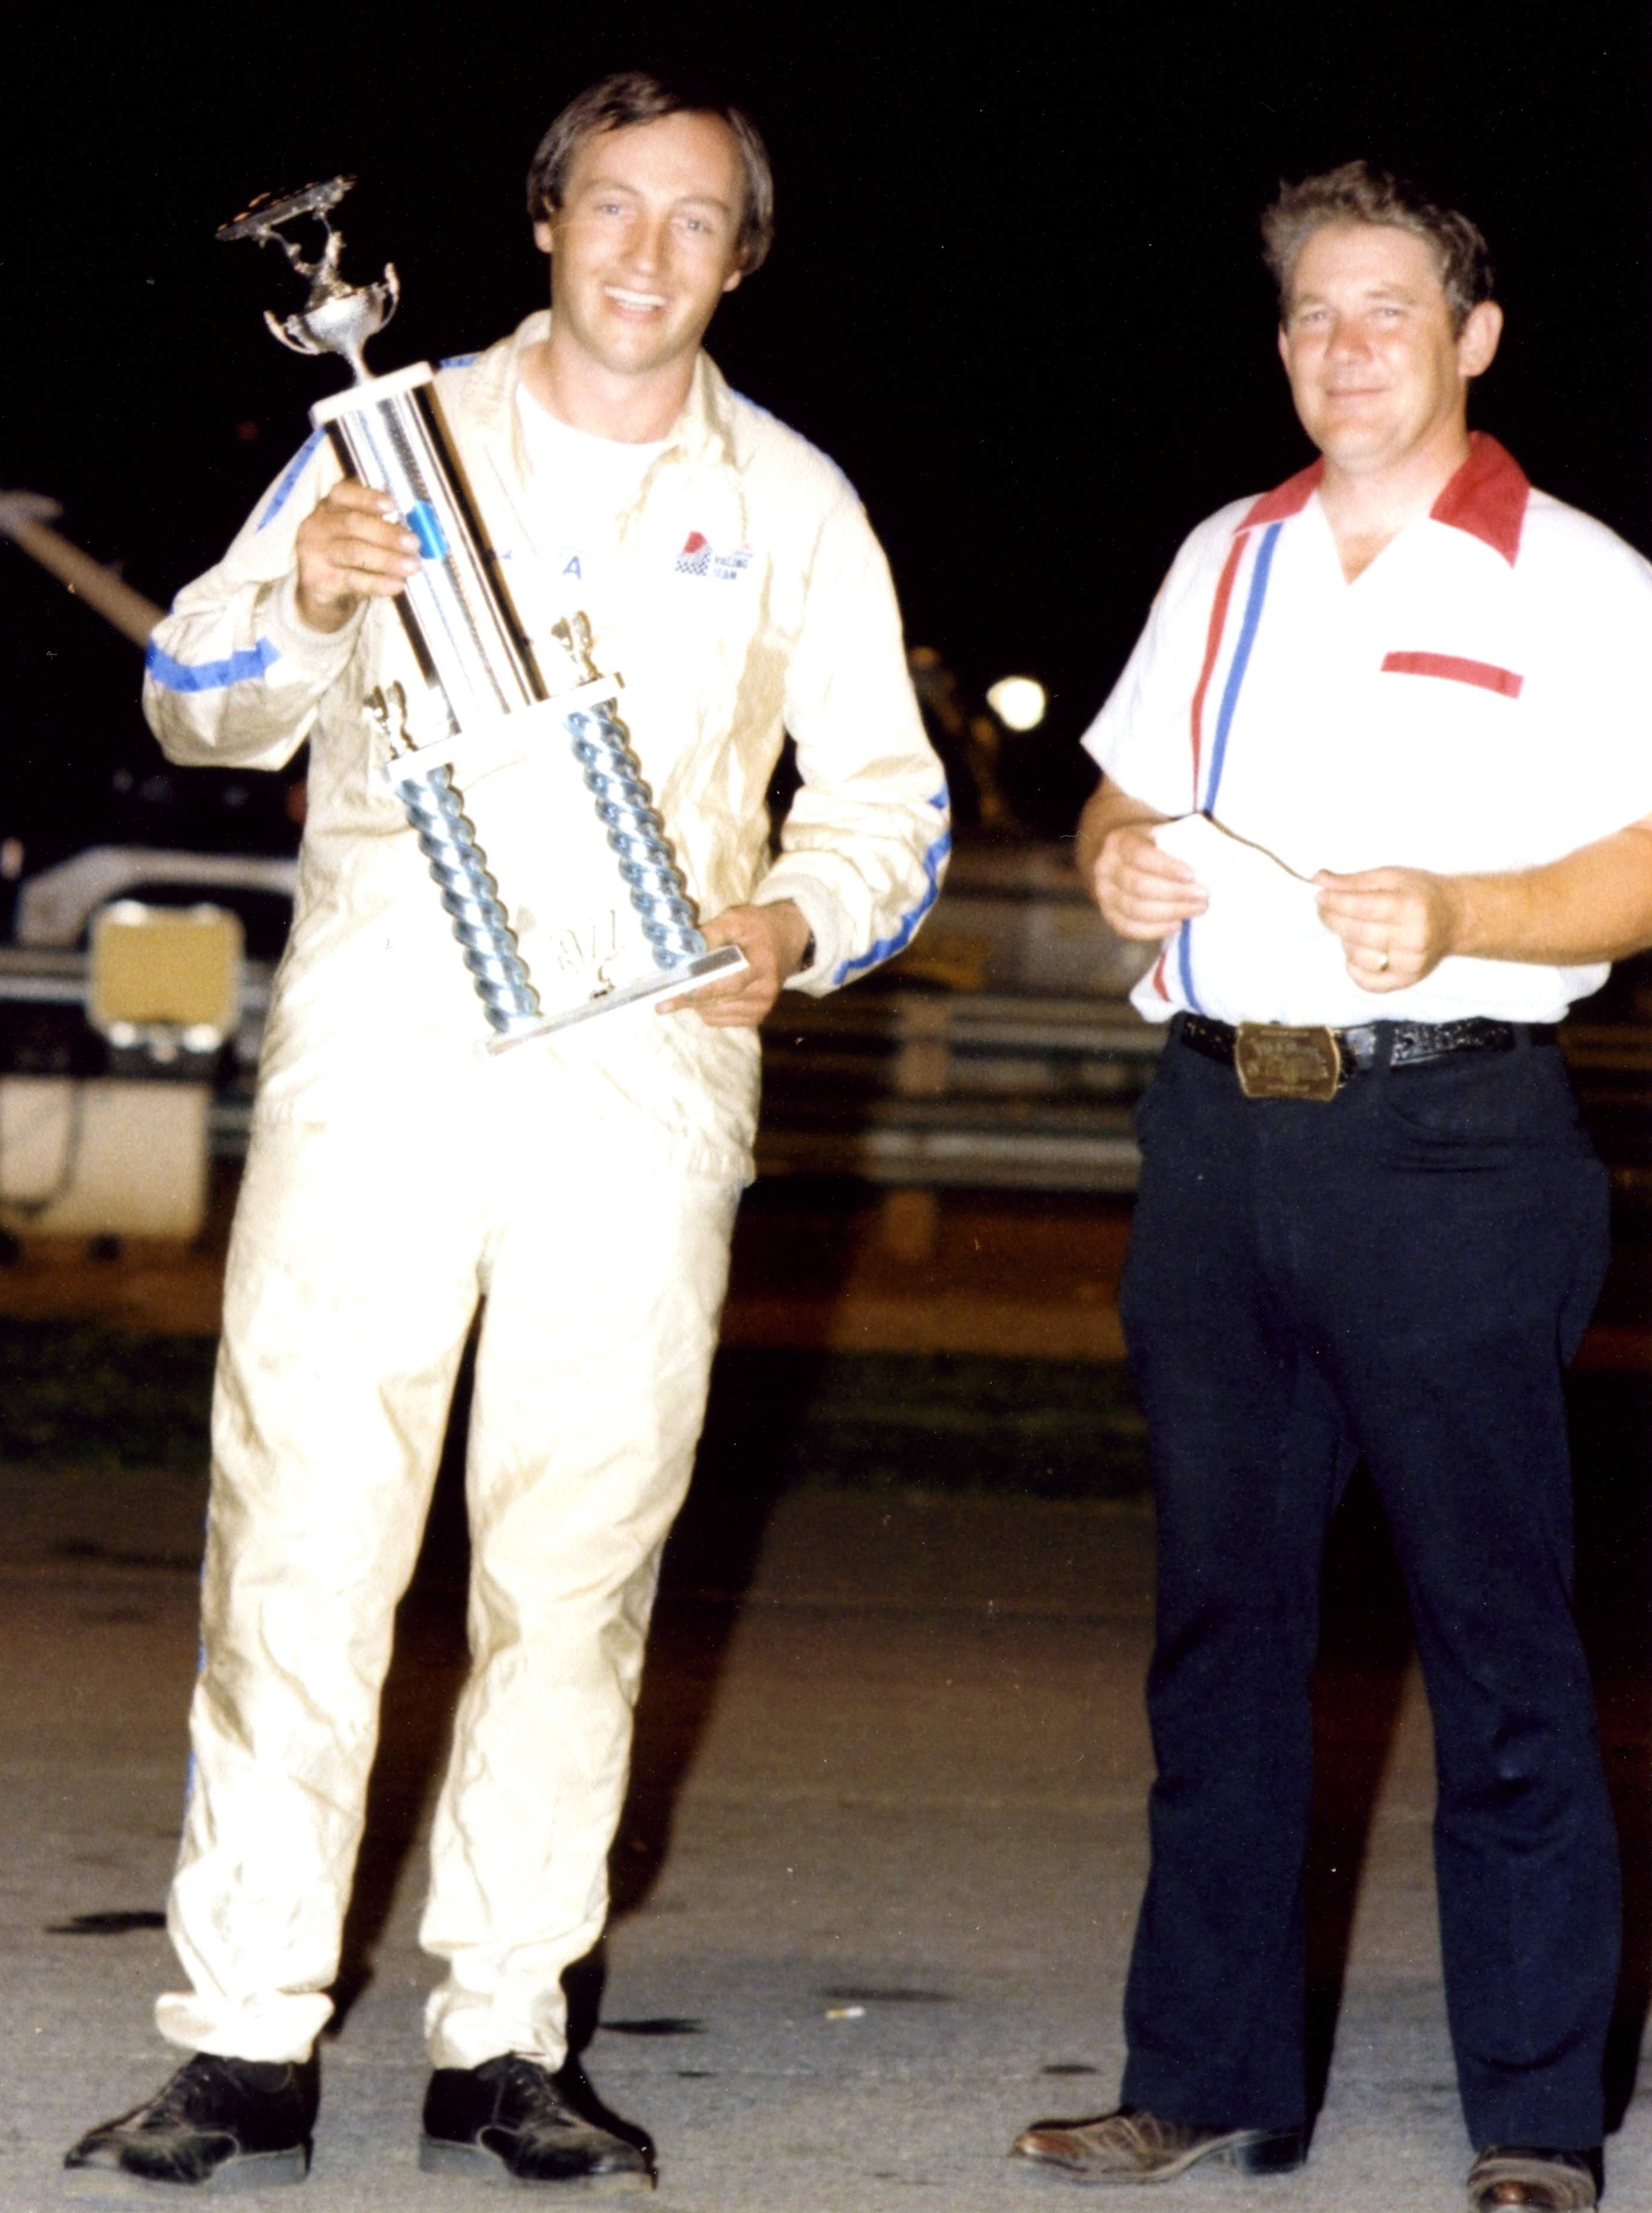 A race car driver is presented a trophy after winning a race